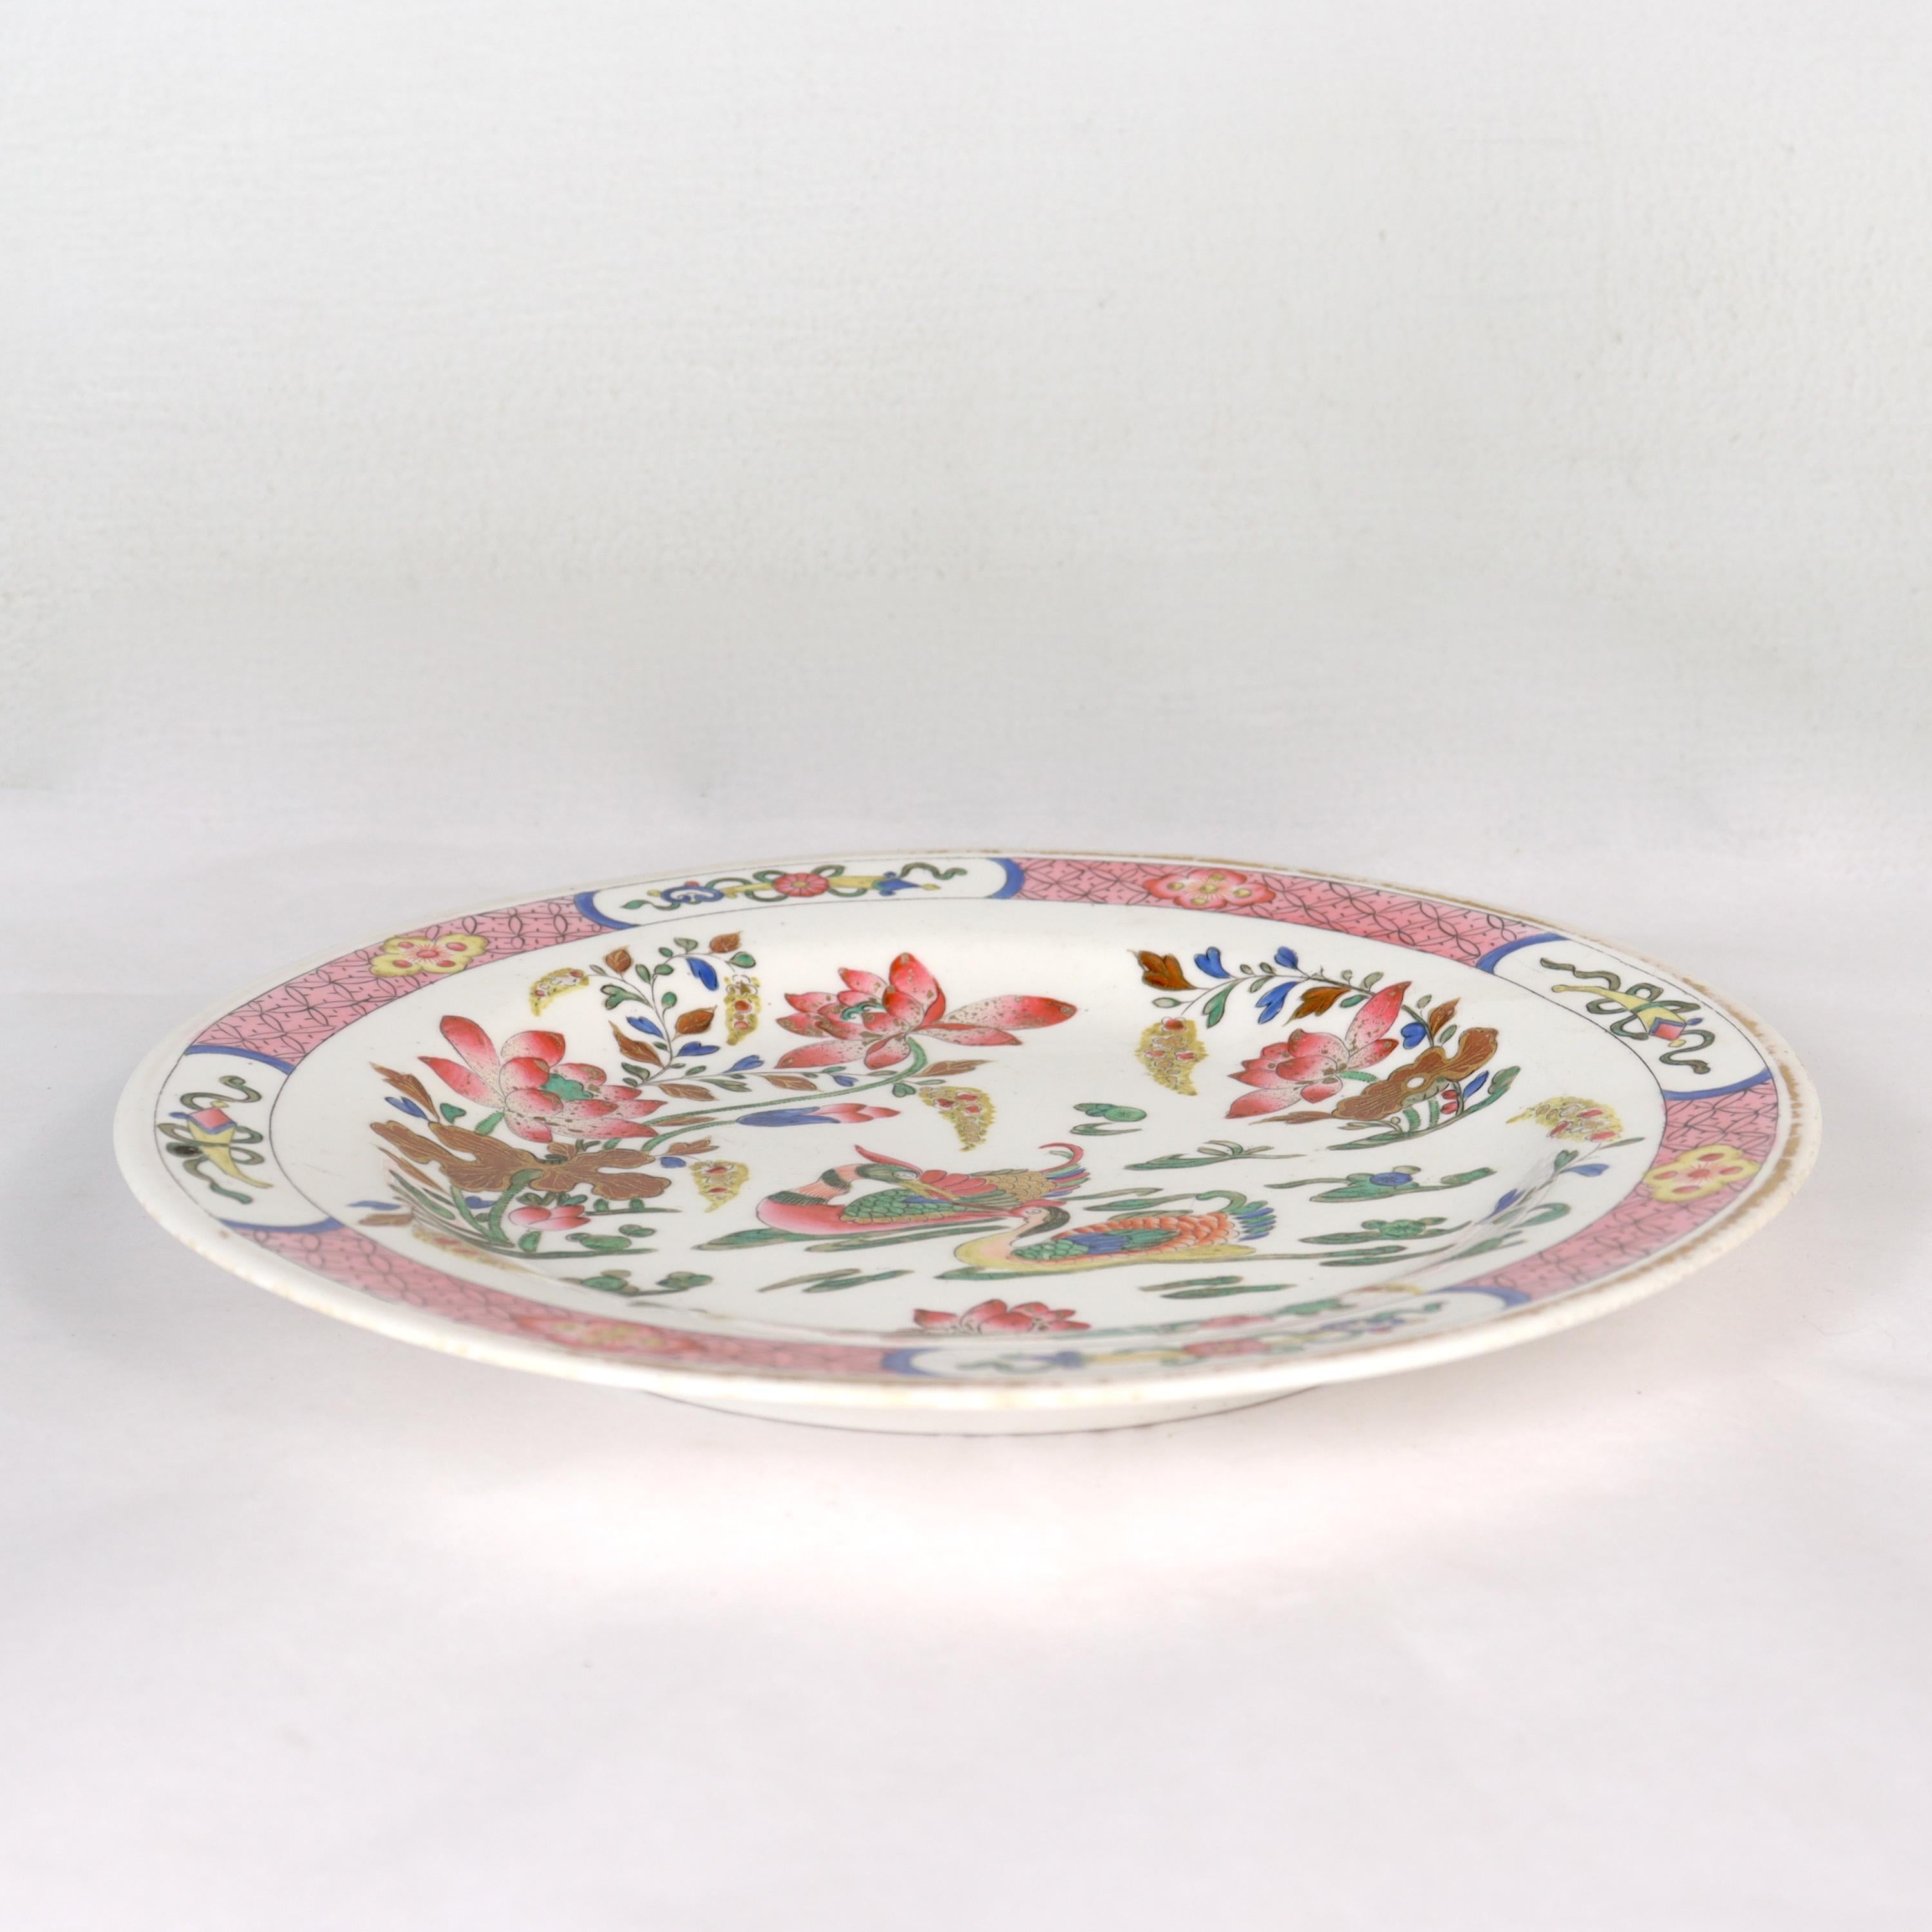 George III Antique 19th Century Spode English Porcelain Pink Ducks Pattern Desert Plate For Sale